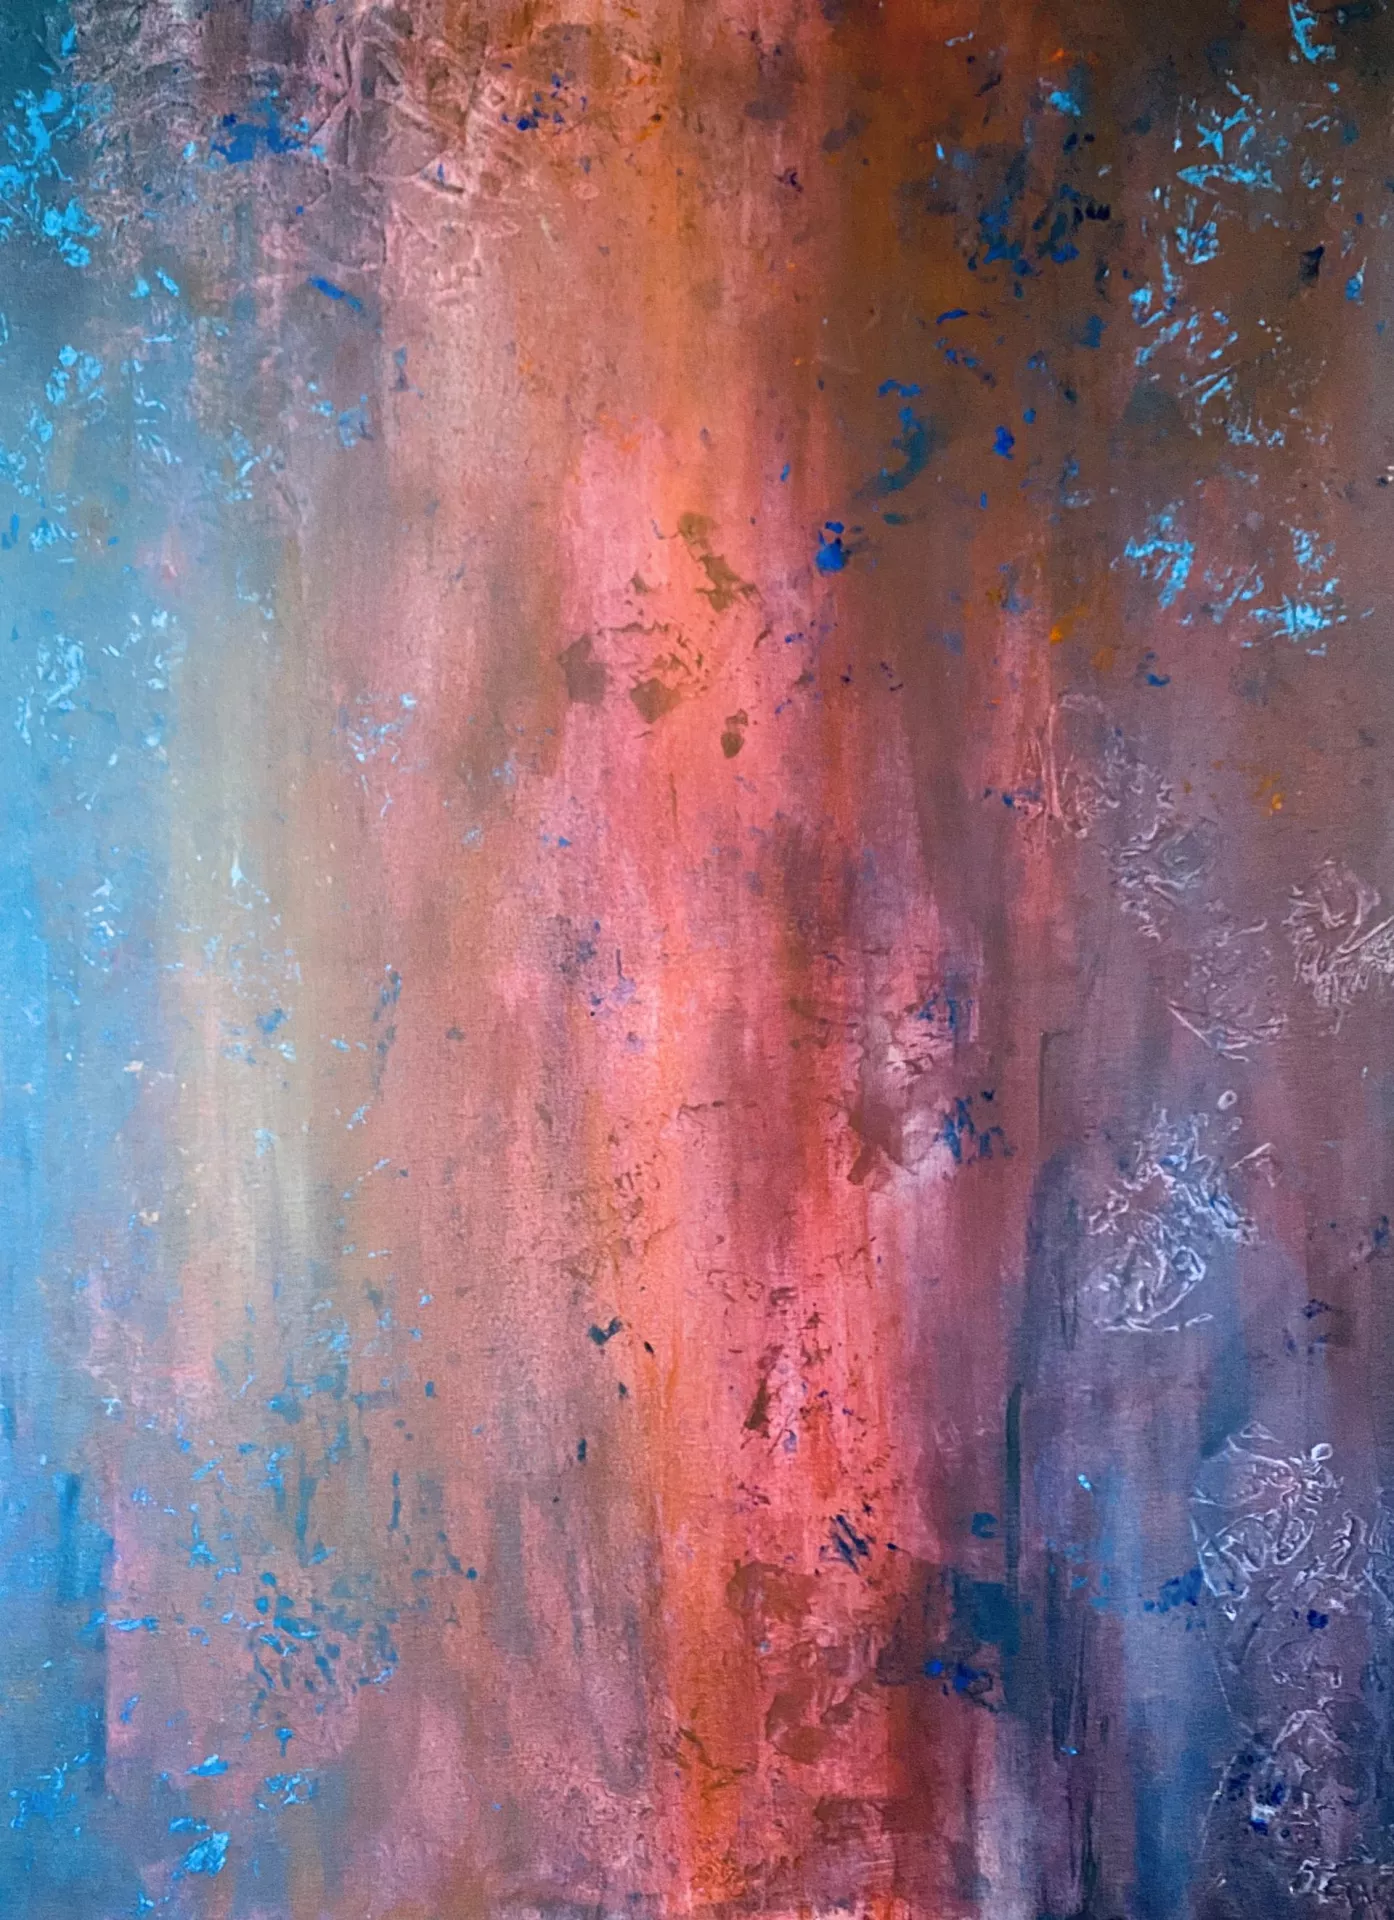 This piece is a dance of vertical, bright but washed-out colors ranging from sky blue, pinks and oranges, to darker blues and purples. Scattered colors move across the piece.